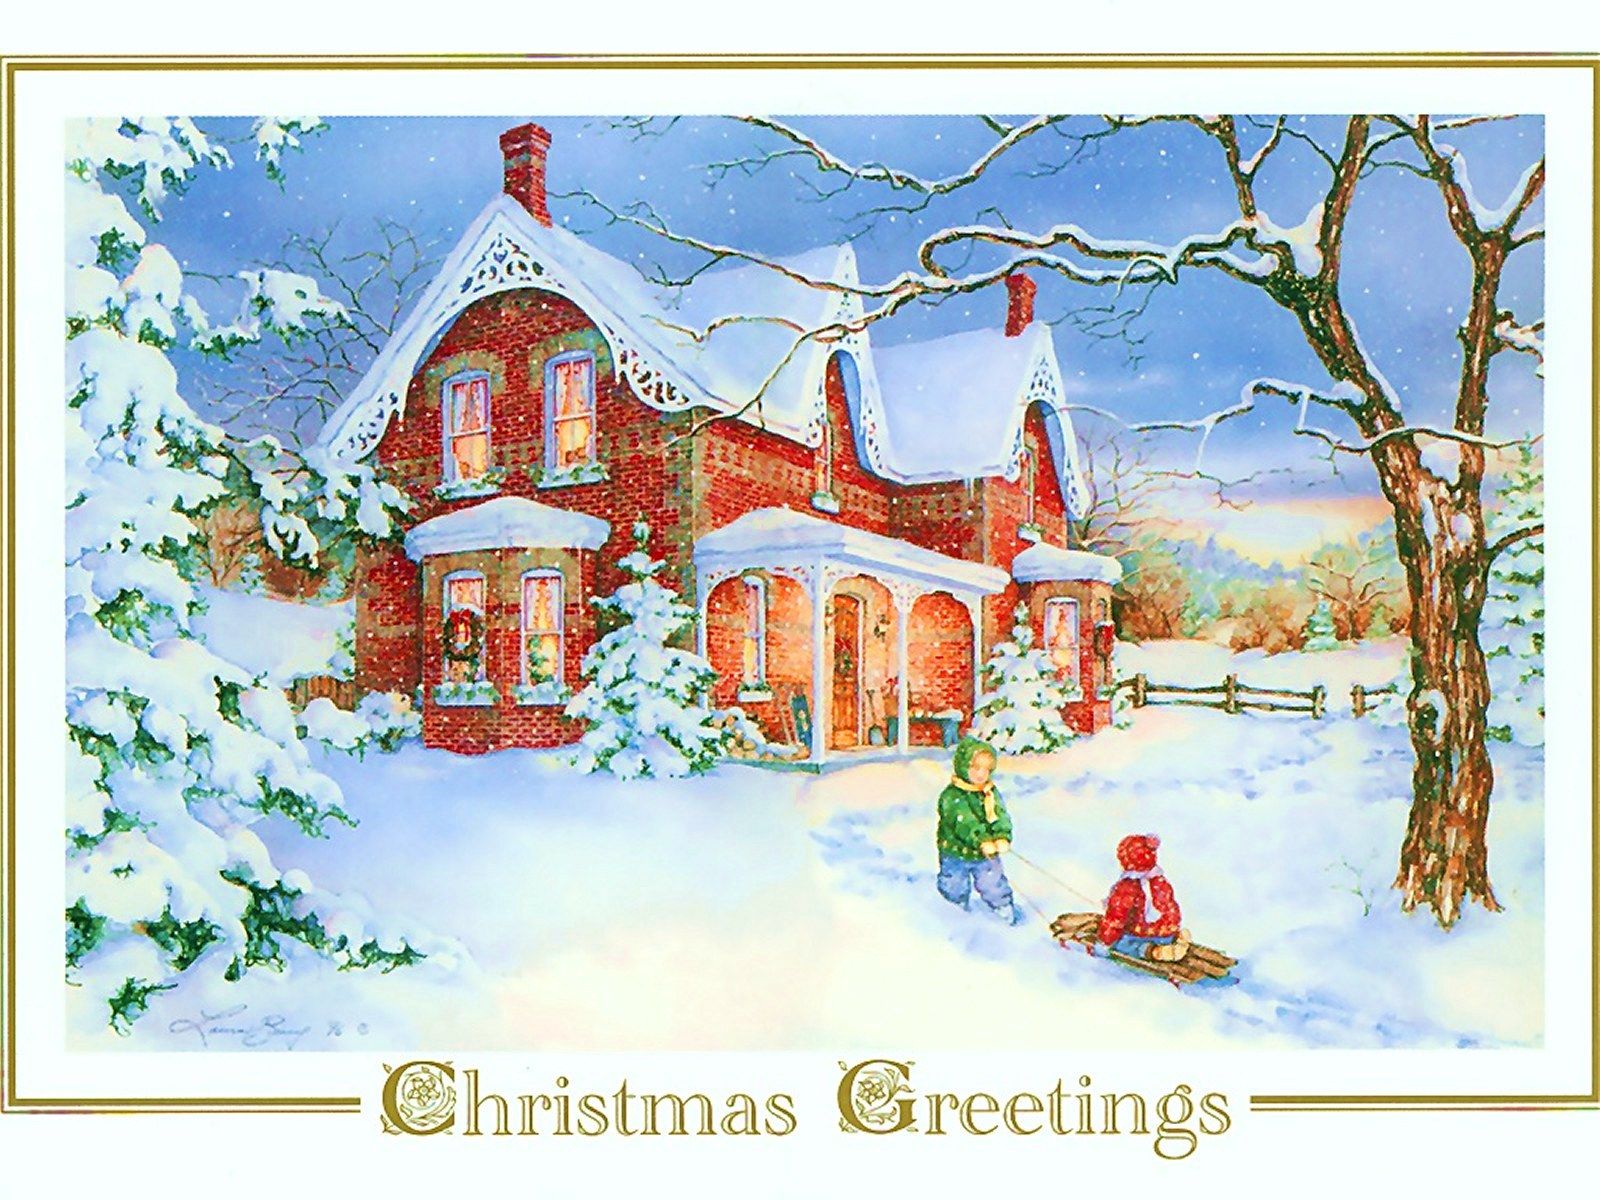 Fun Ways to Recycle Christmas Cards  SellCell.com Blog